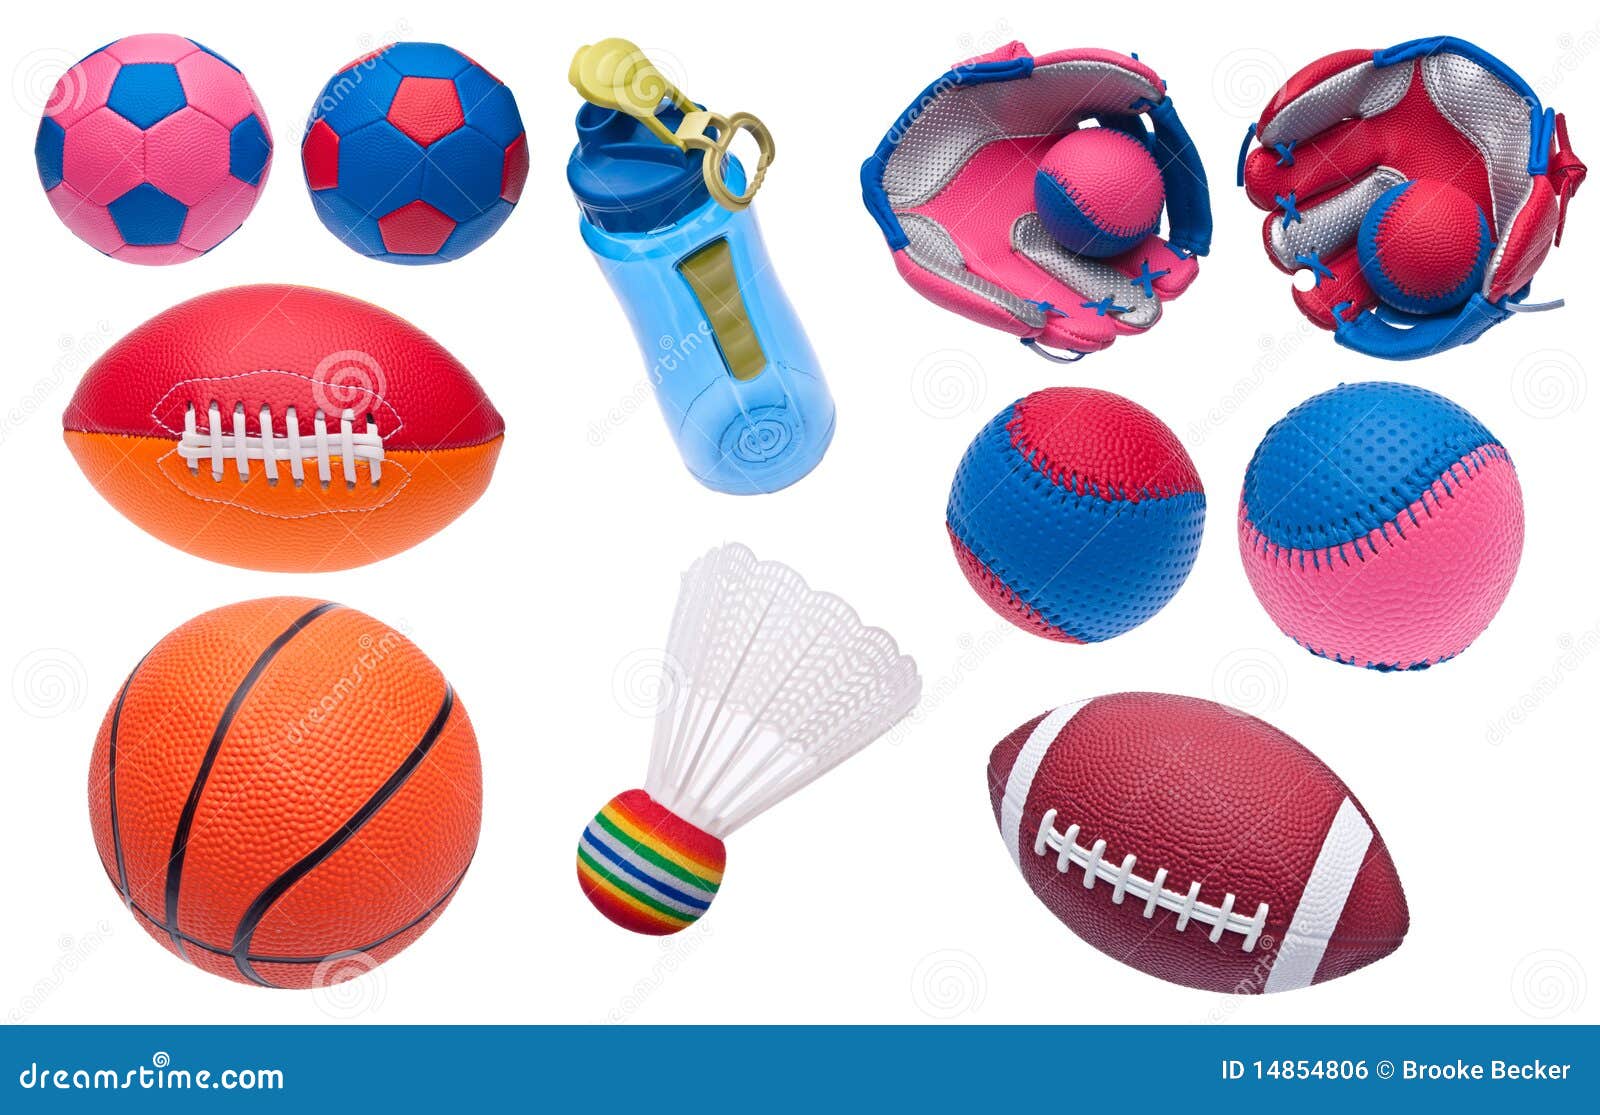 variety of toy sports objects